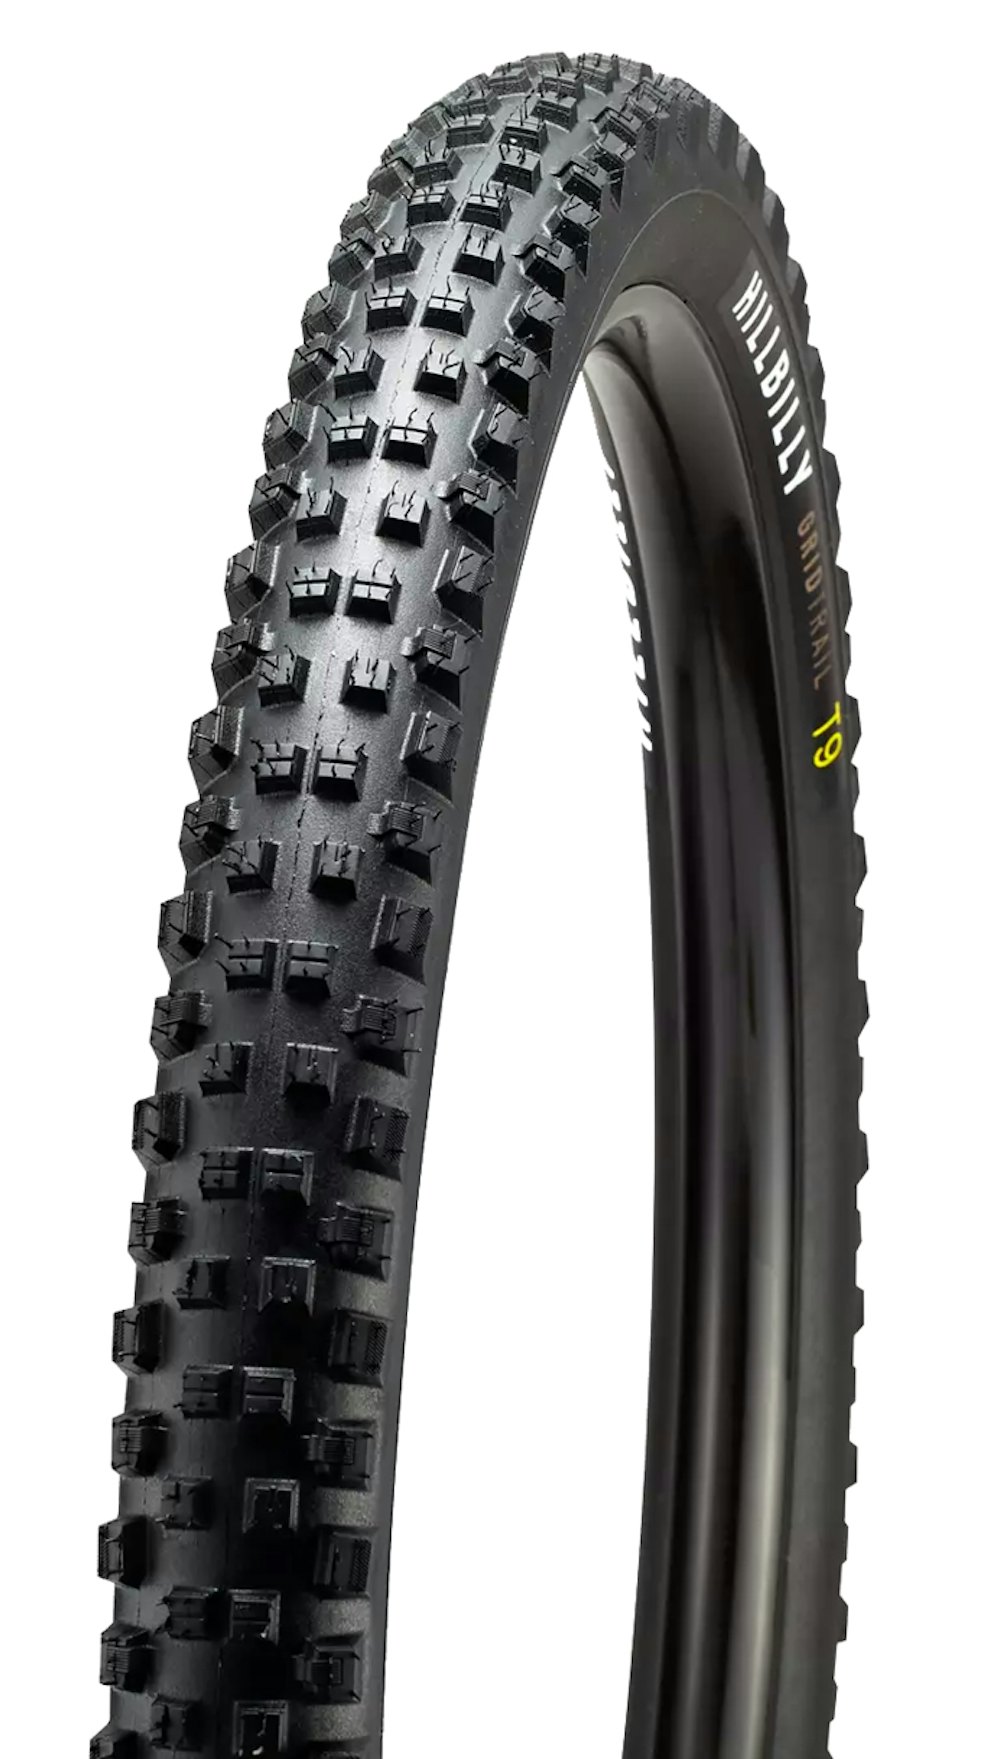 Specialized Hillbilly Grid Trail 2BR T9 27.5" Tire